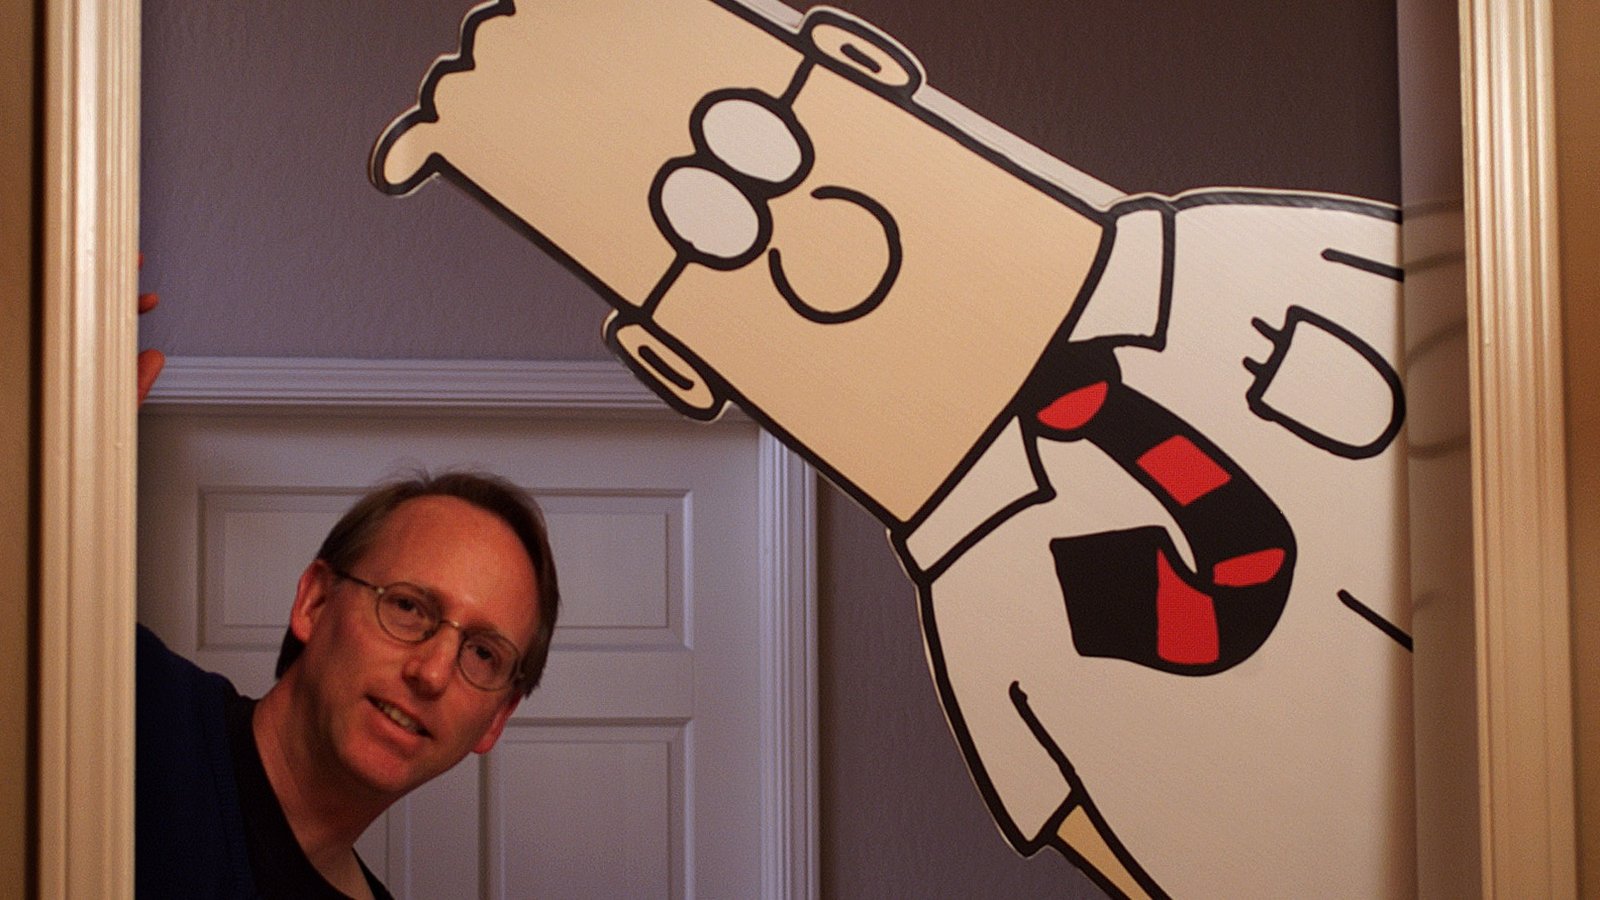 US papers drop Dilbert comic strip after racist remarks